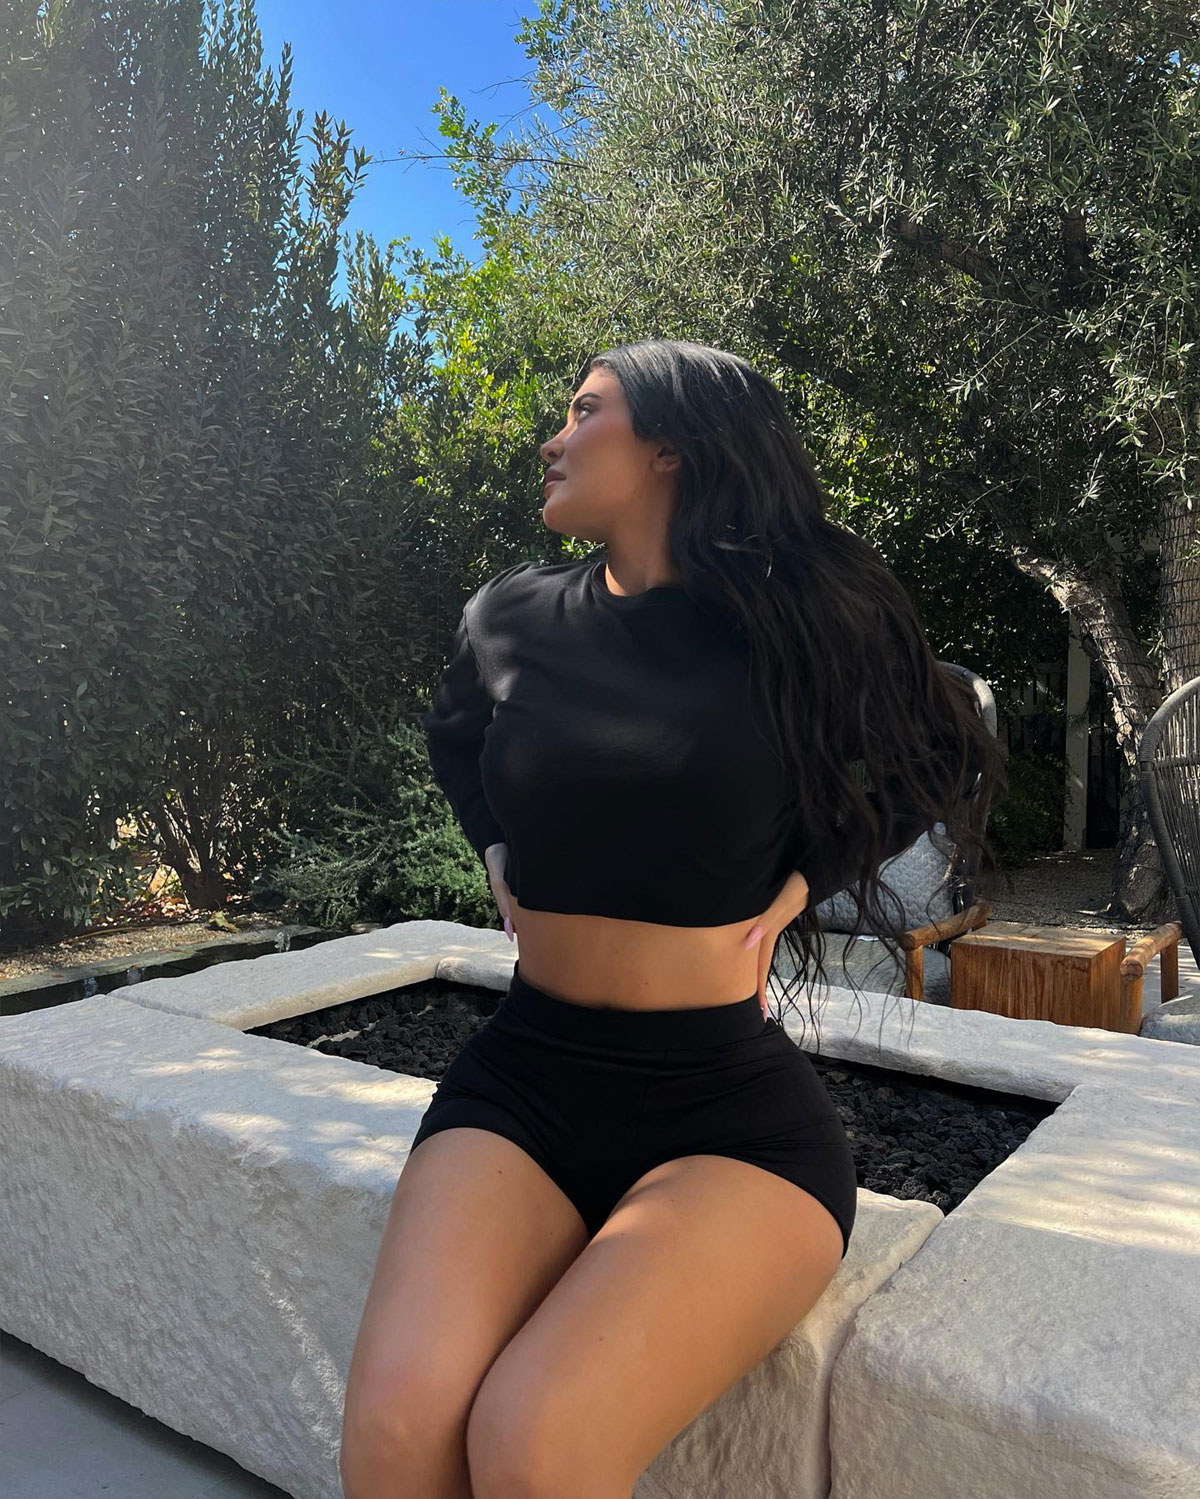 Kylie Jenner posing outside in crop top and bike shorts